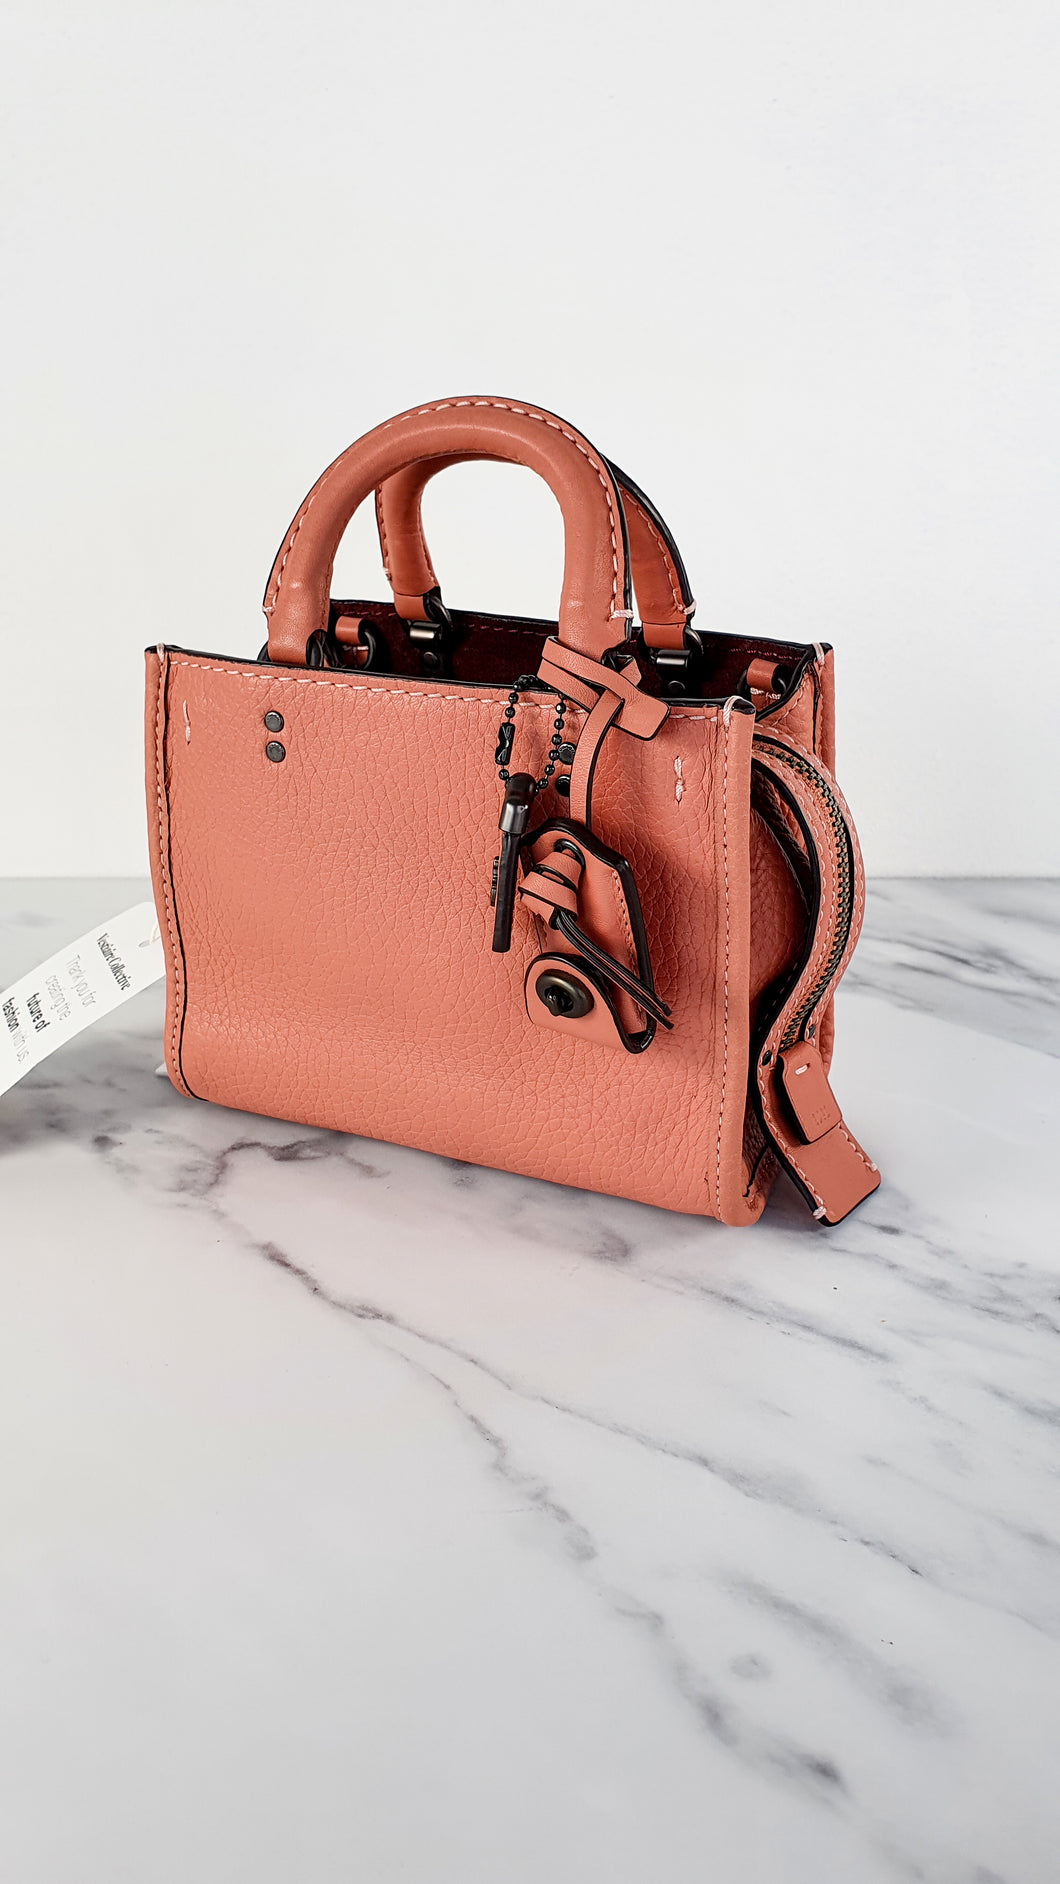 Coach Rogue 17 in Melon Pebble Leather with Oxblood Suede Lining - Crossbody Bag Salmon Pink Pastel Orange - Coach 22978